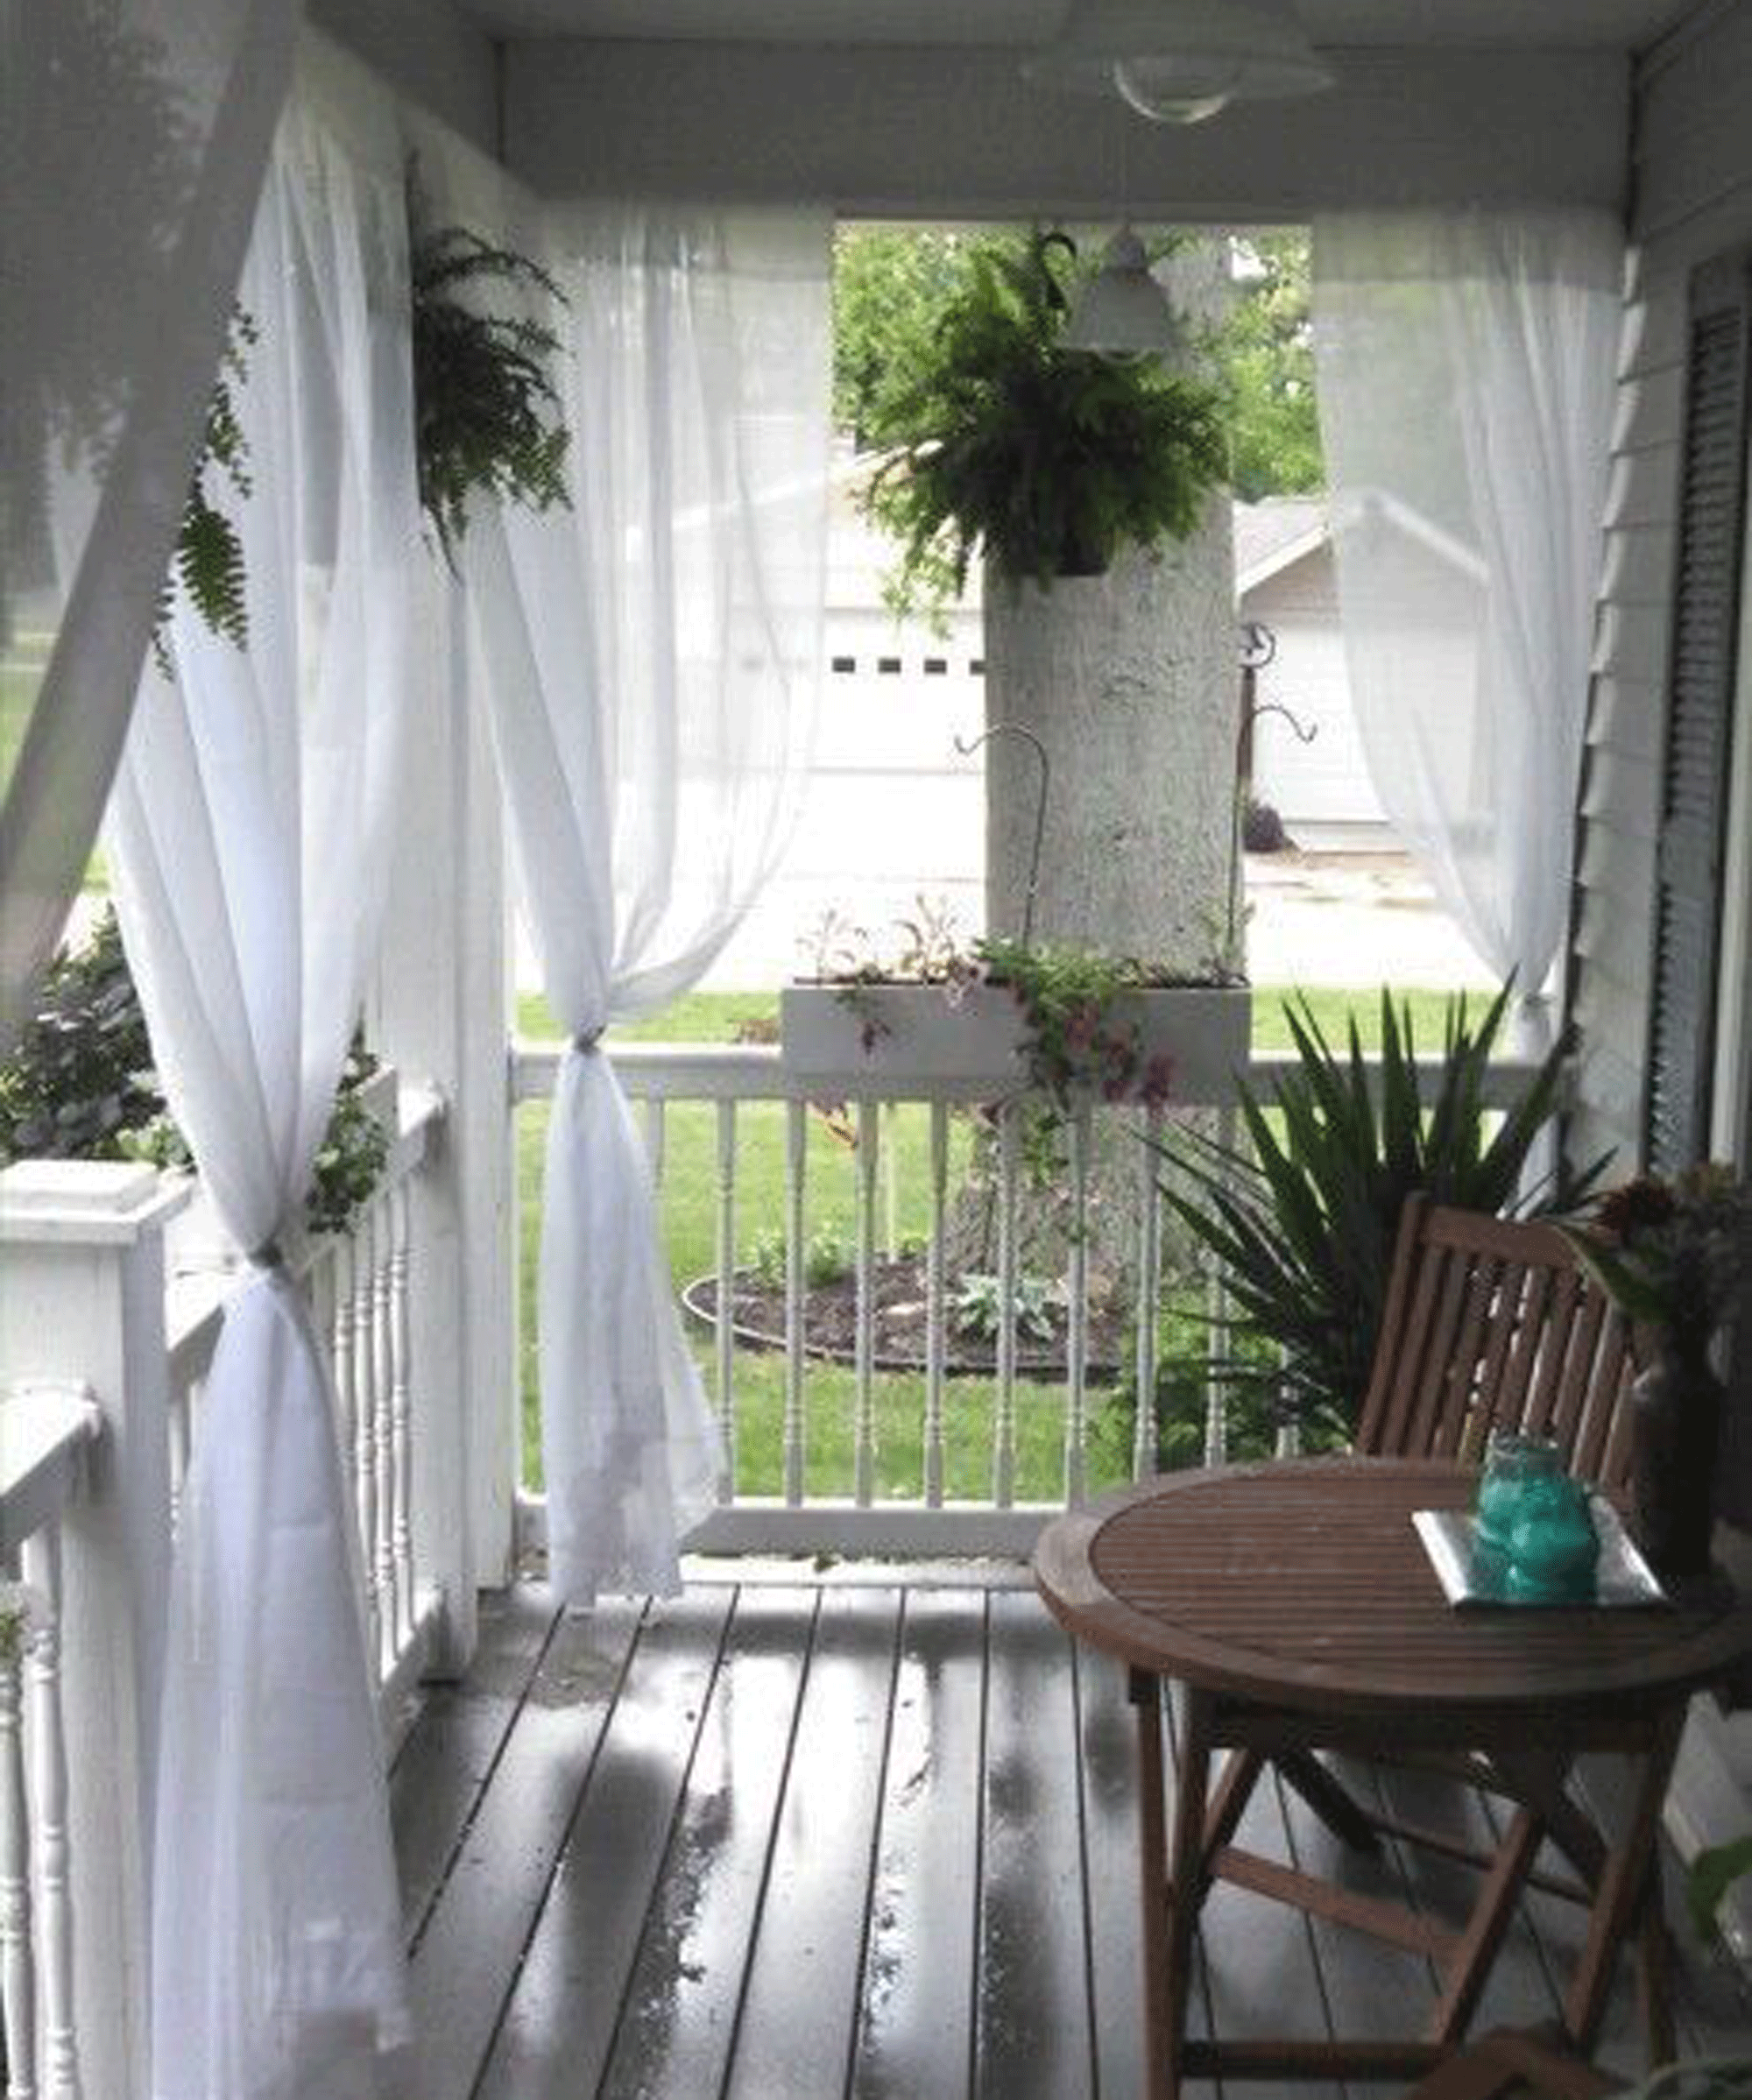 Breezy porch with sheer white panels wafting.